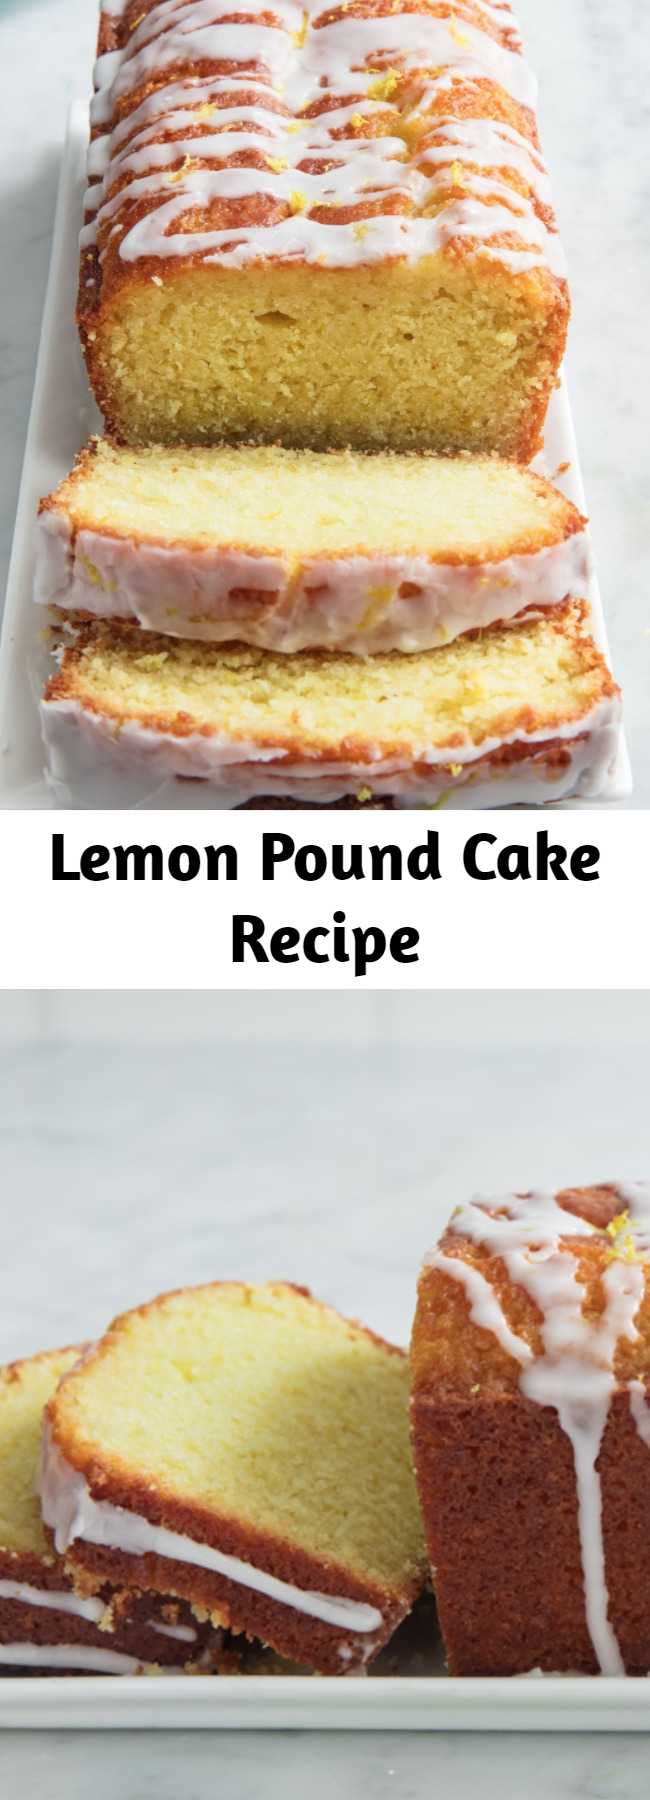 Lemon Pound Cake Recipe - This Lemon Pound Cake is packed with lemon flavor. This one's so much better than Starbuck's. Trust us. 